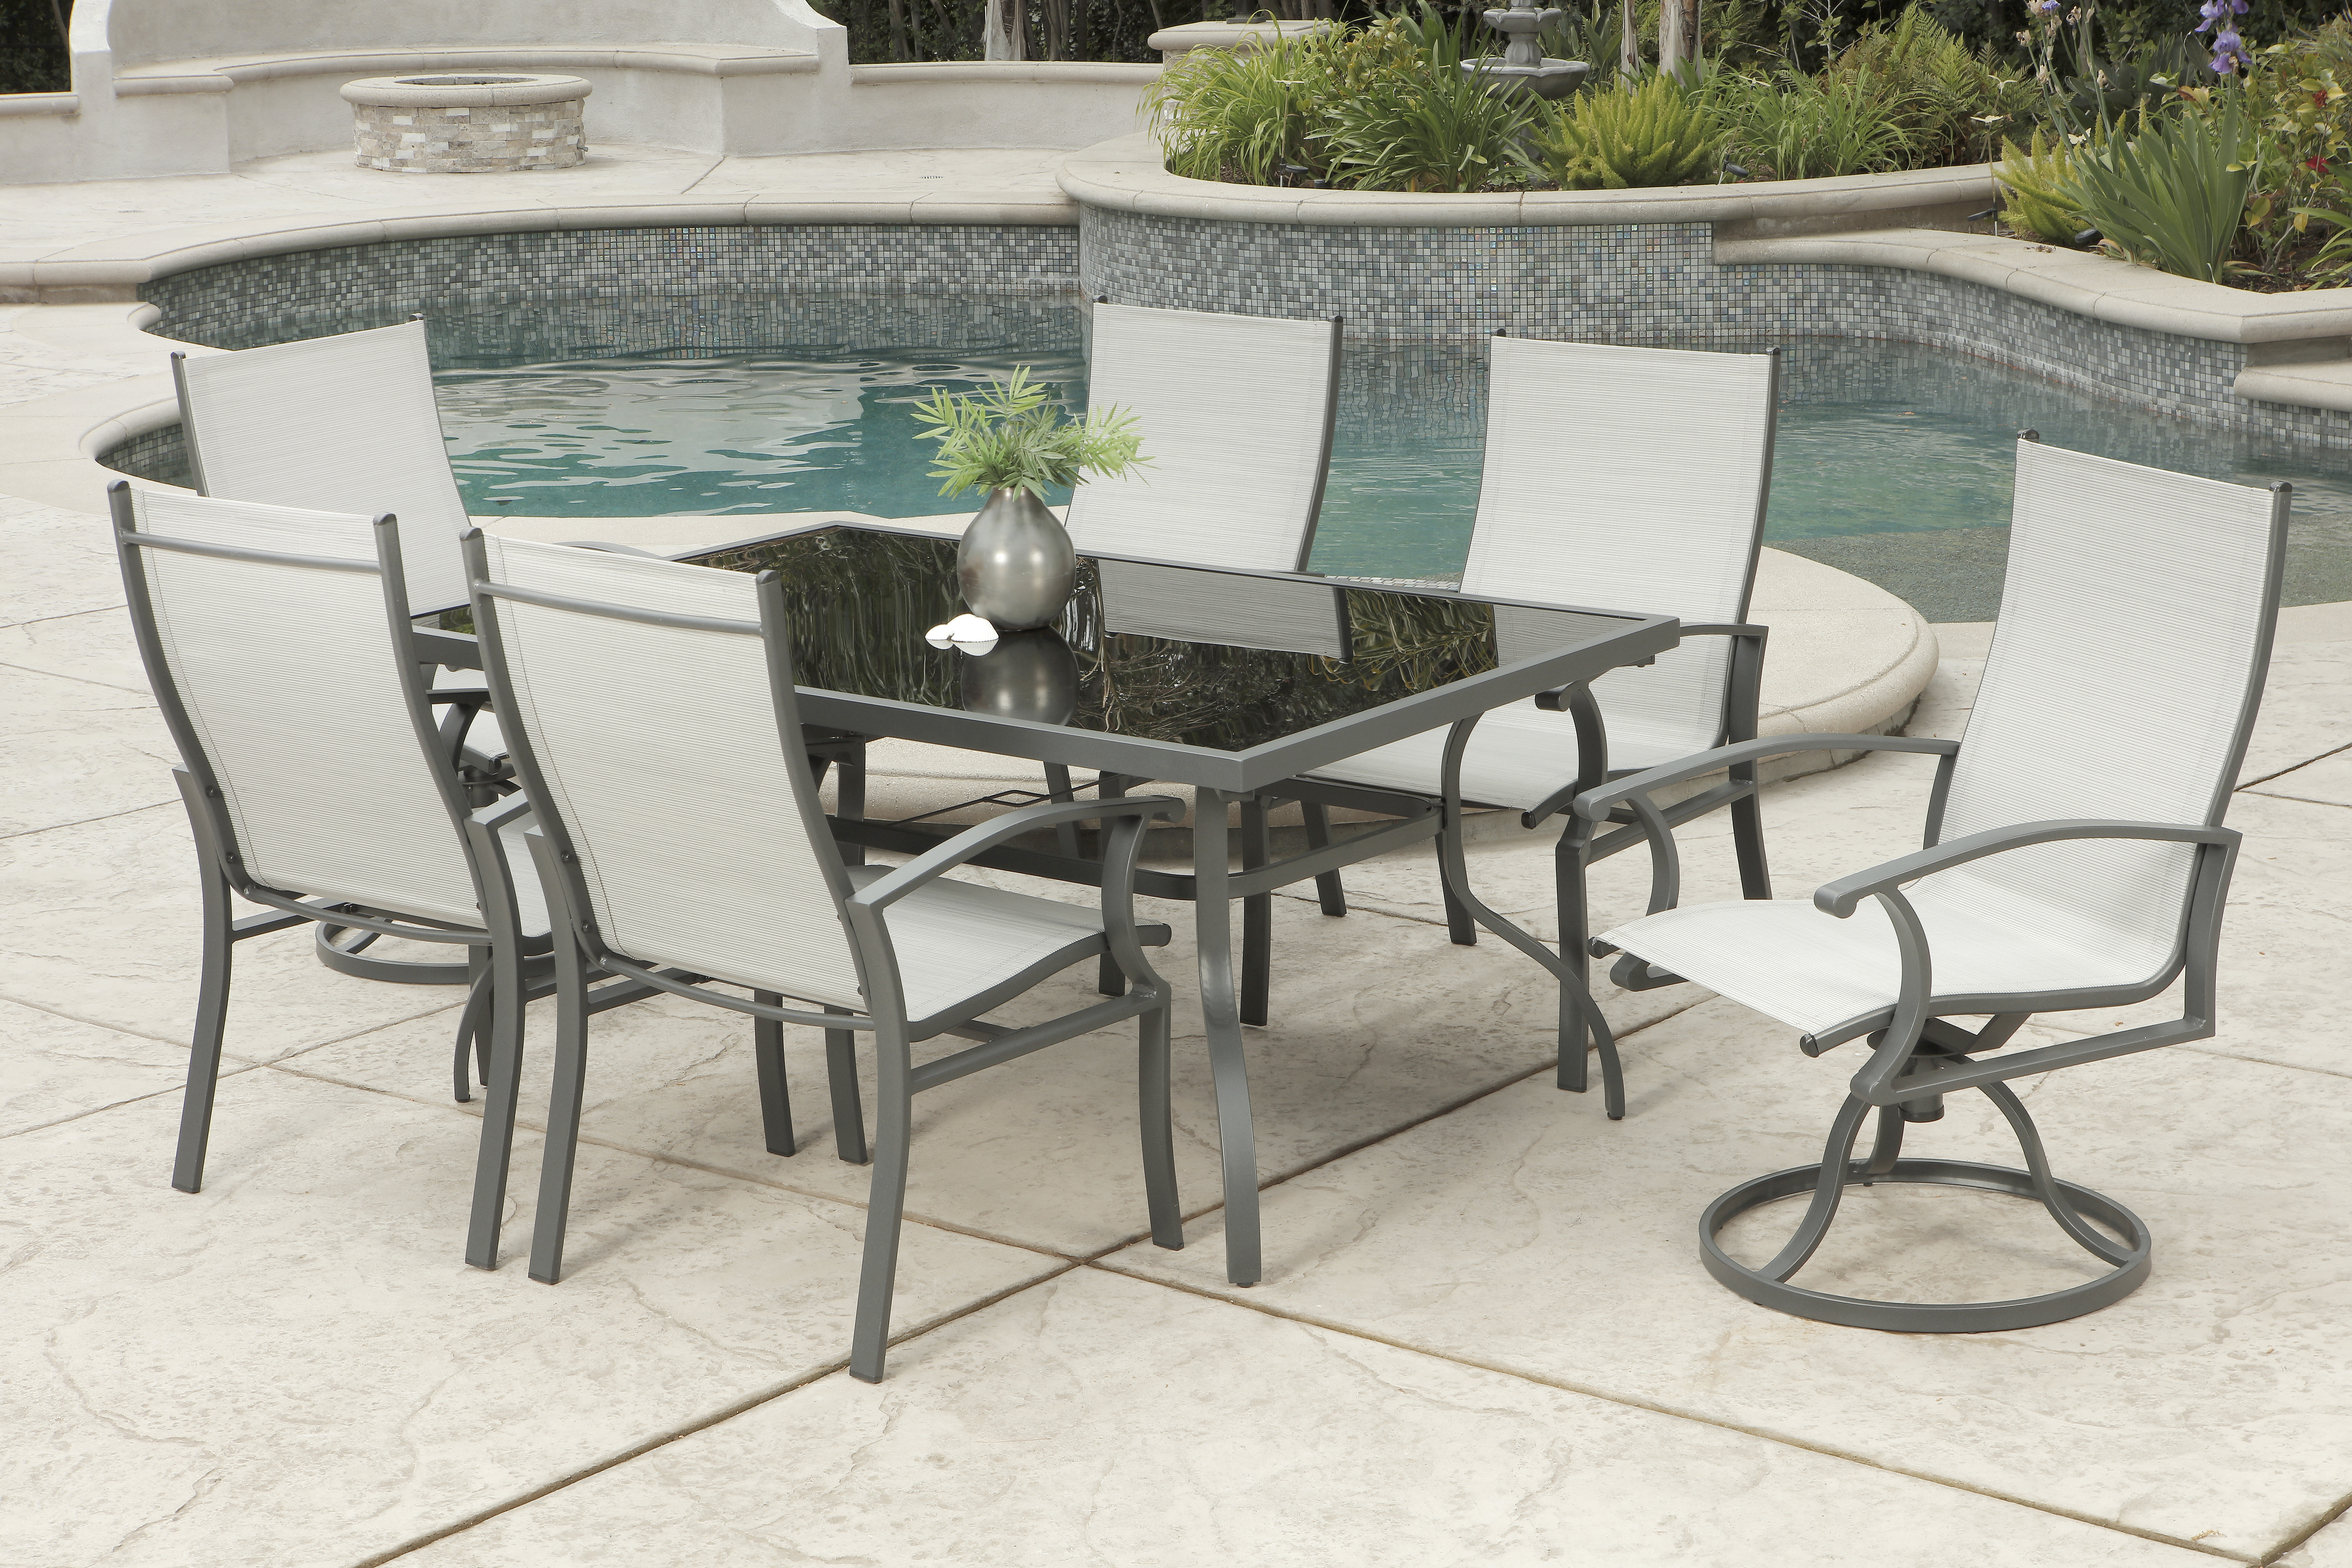 7 Piece Steel Table Chairs Dining Set Patio Furniture Outdoor Glass Table Top 